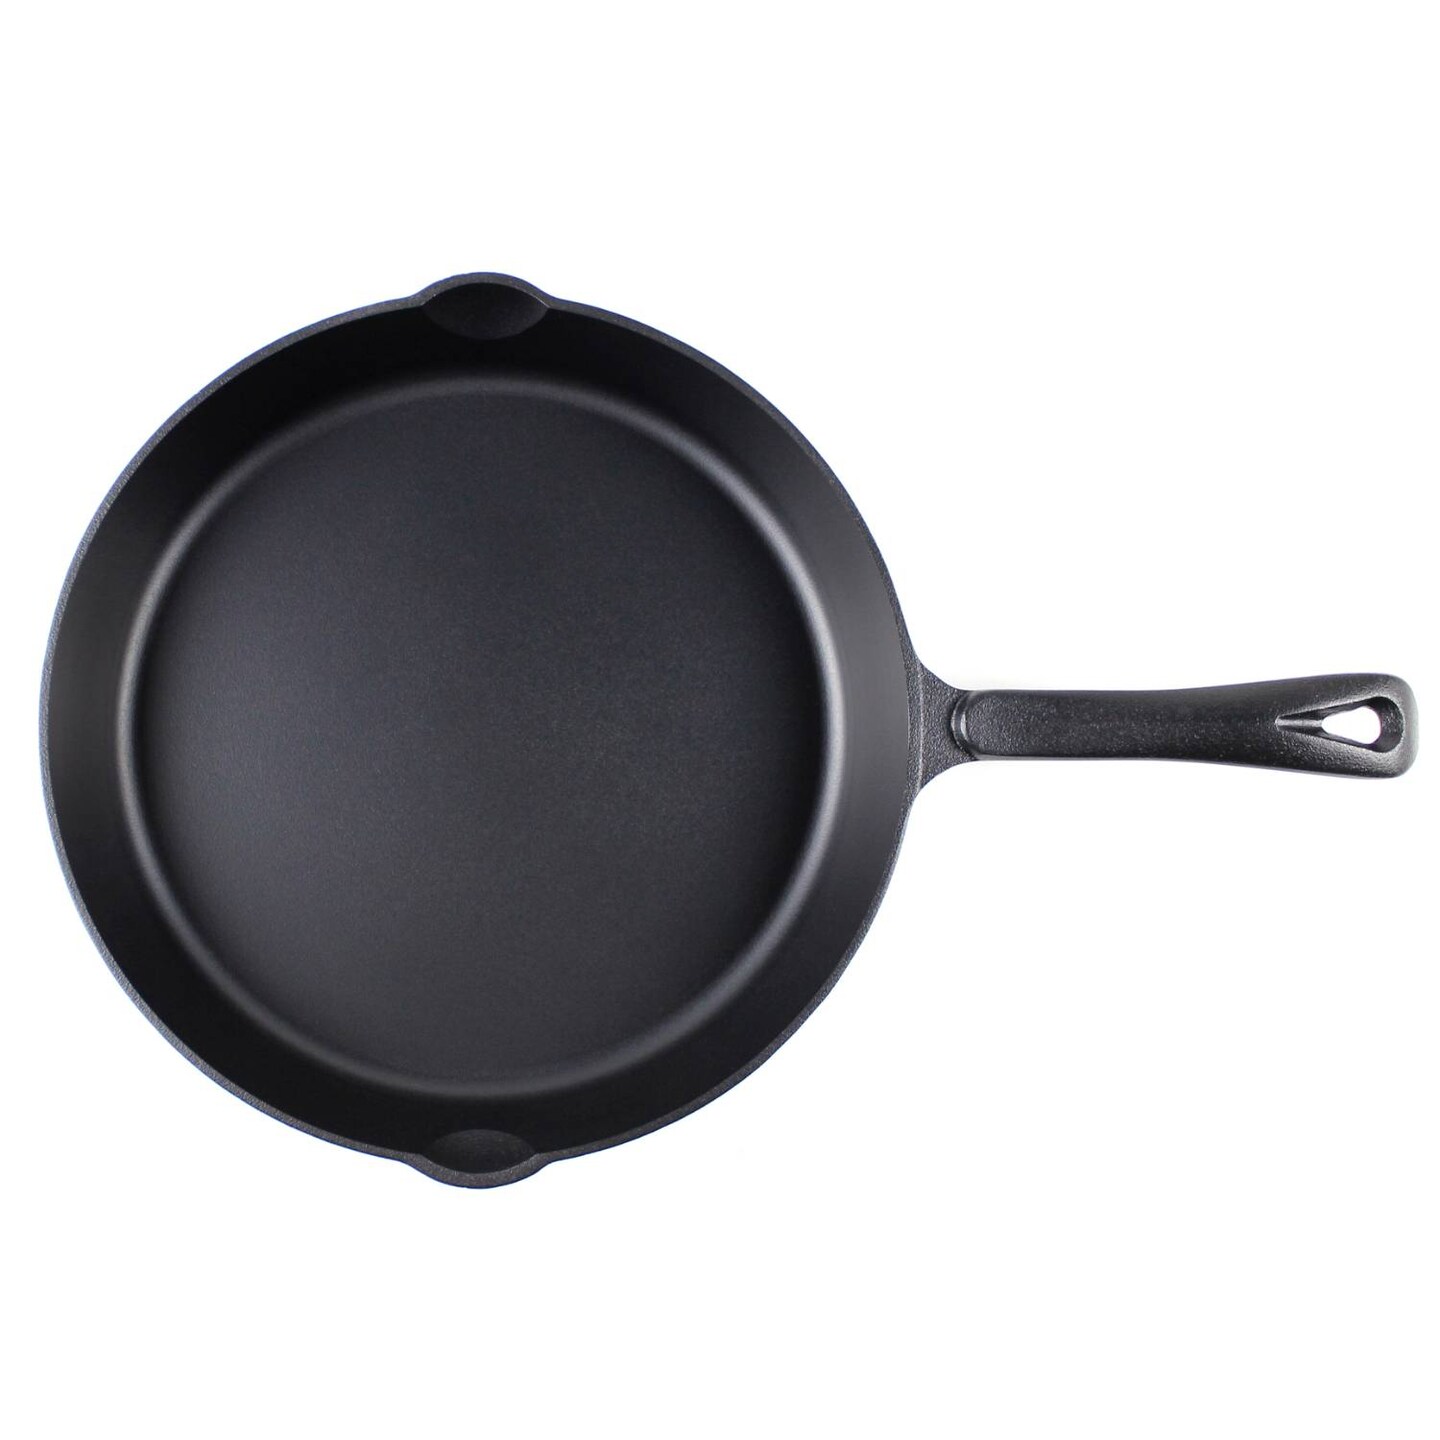 Lehman's Cast Iron Skillet - Nitrogen Hardened Cookware, Tough but  Lightweight, No Need to Season, Silicone Safety Handle Included